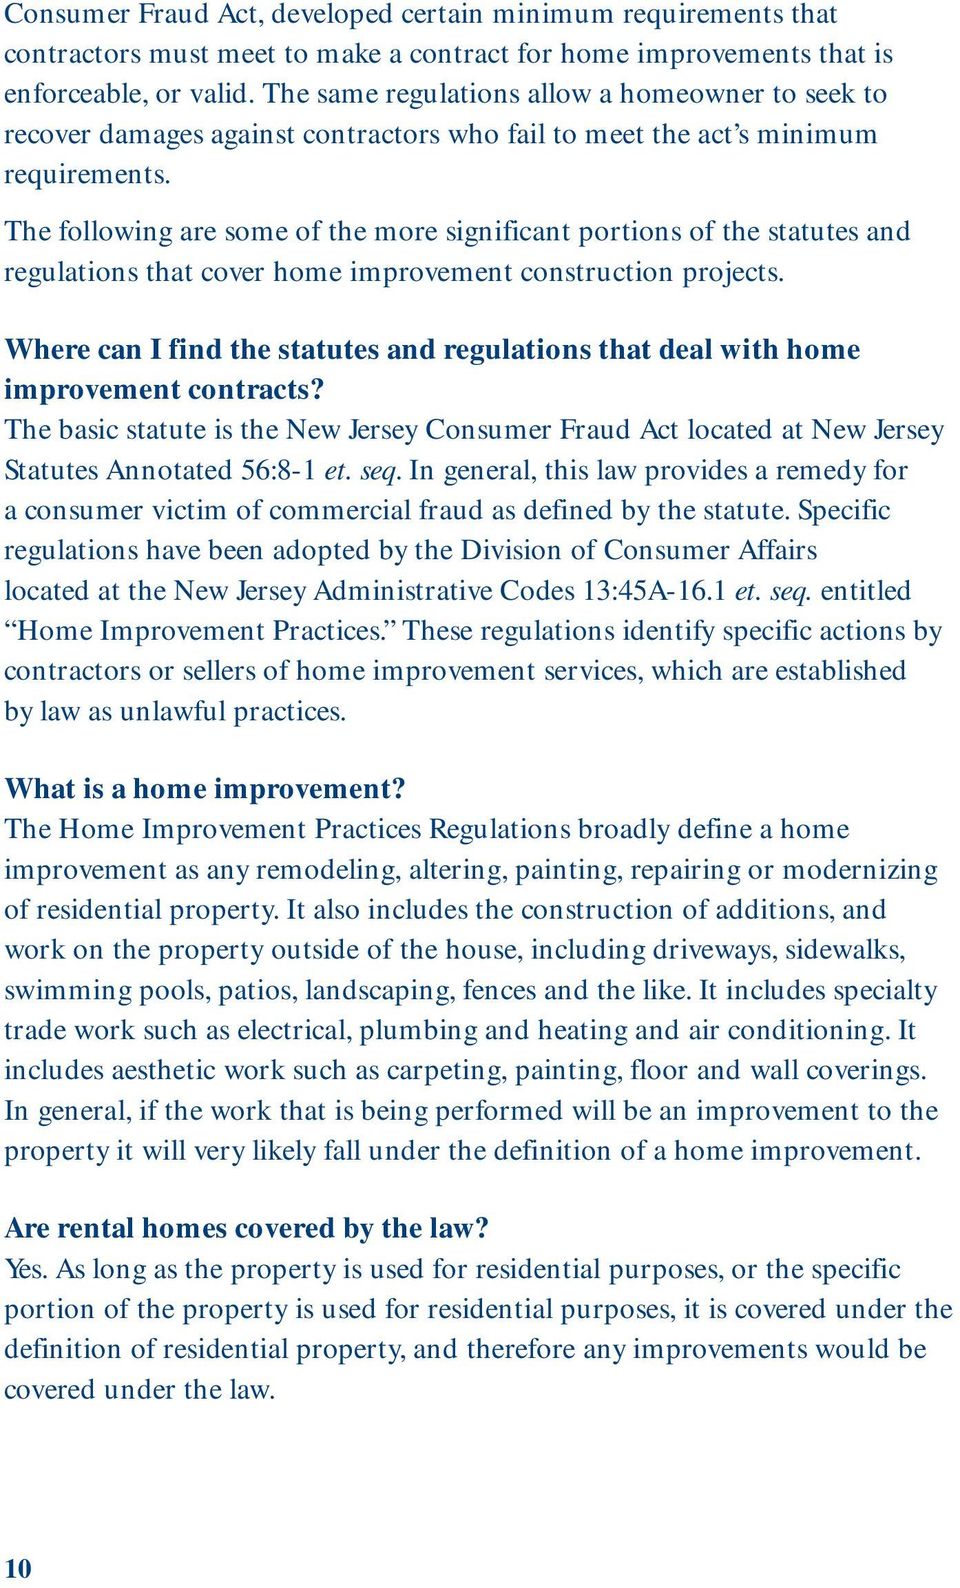 The following are some of the more significant portions of the statutes and regulations that cover home improvement construction projects.